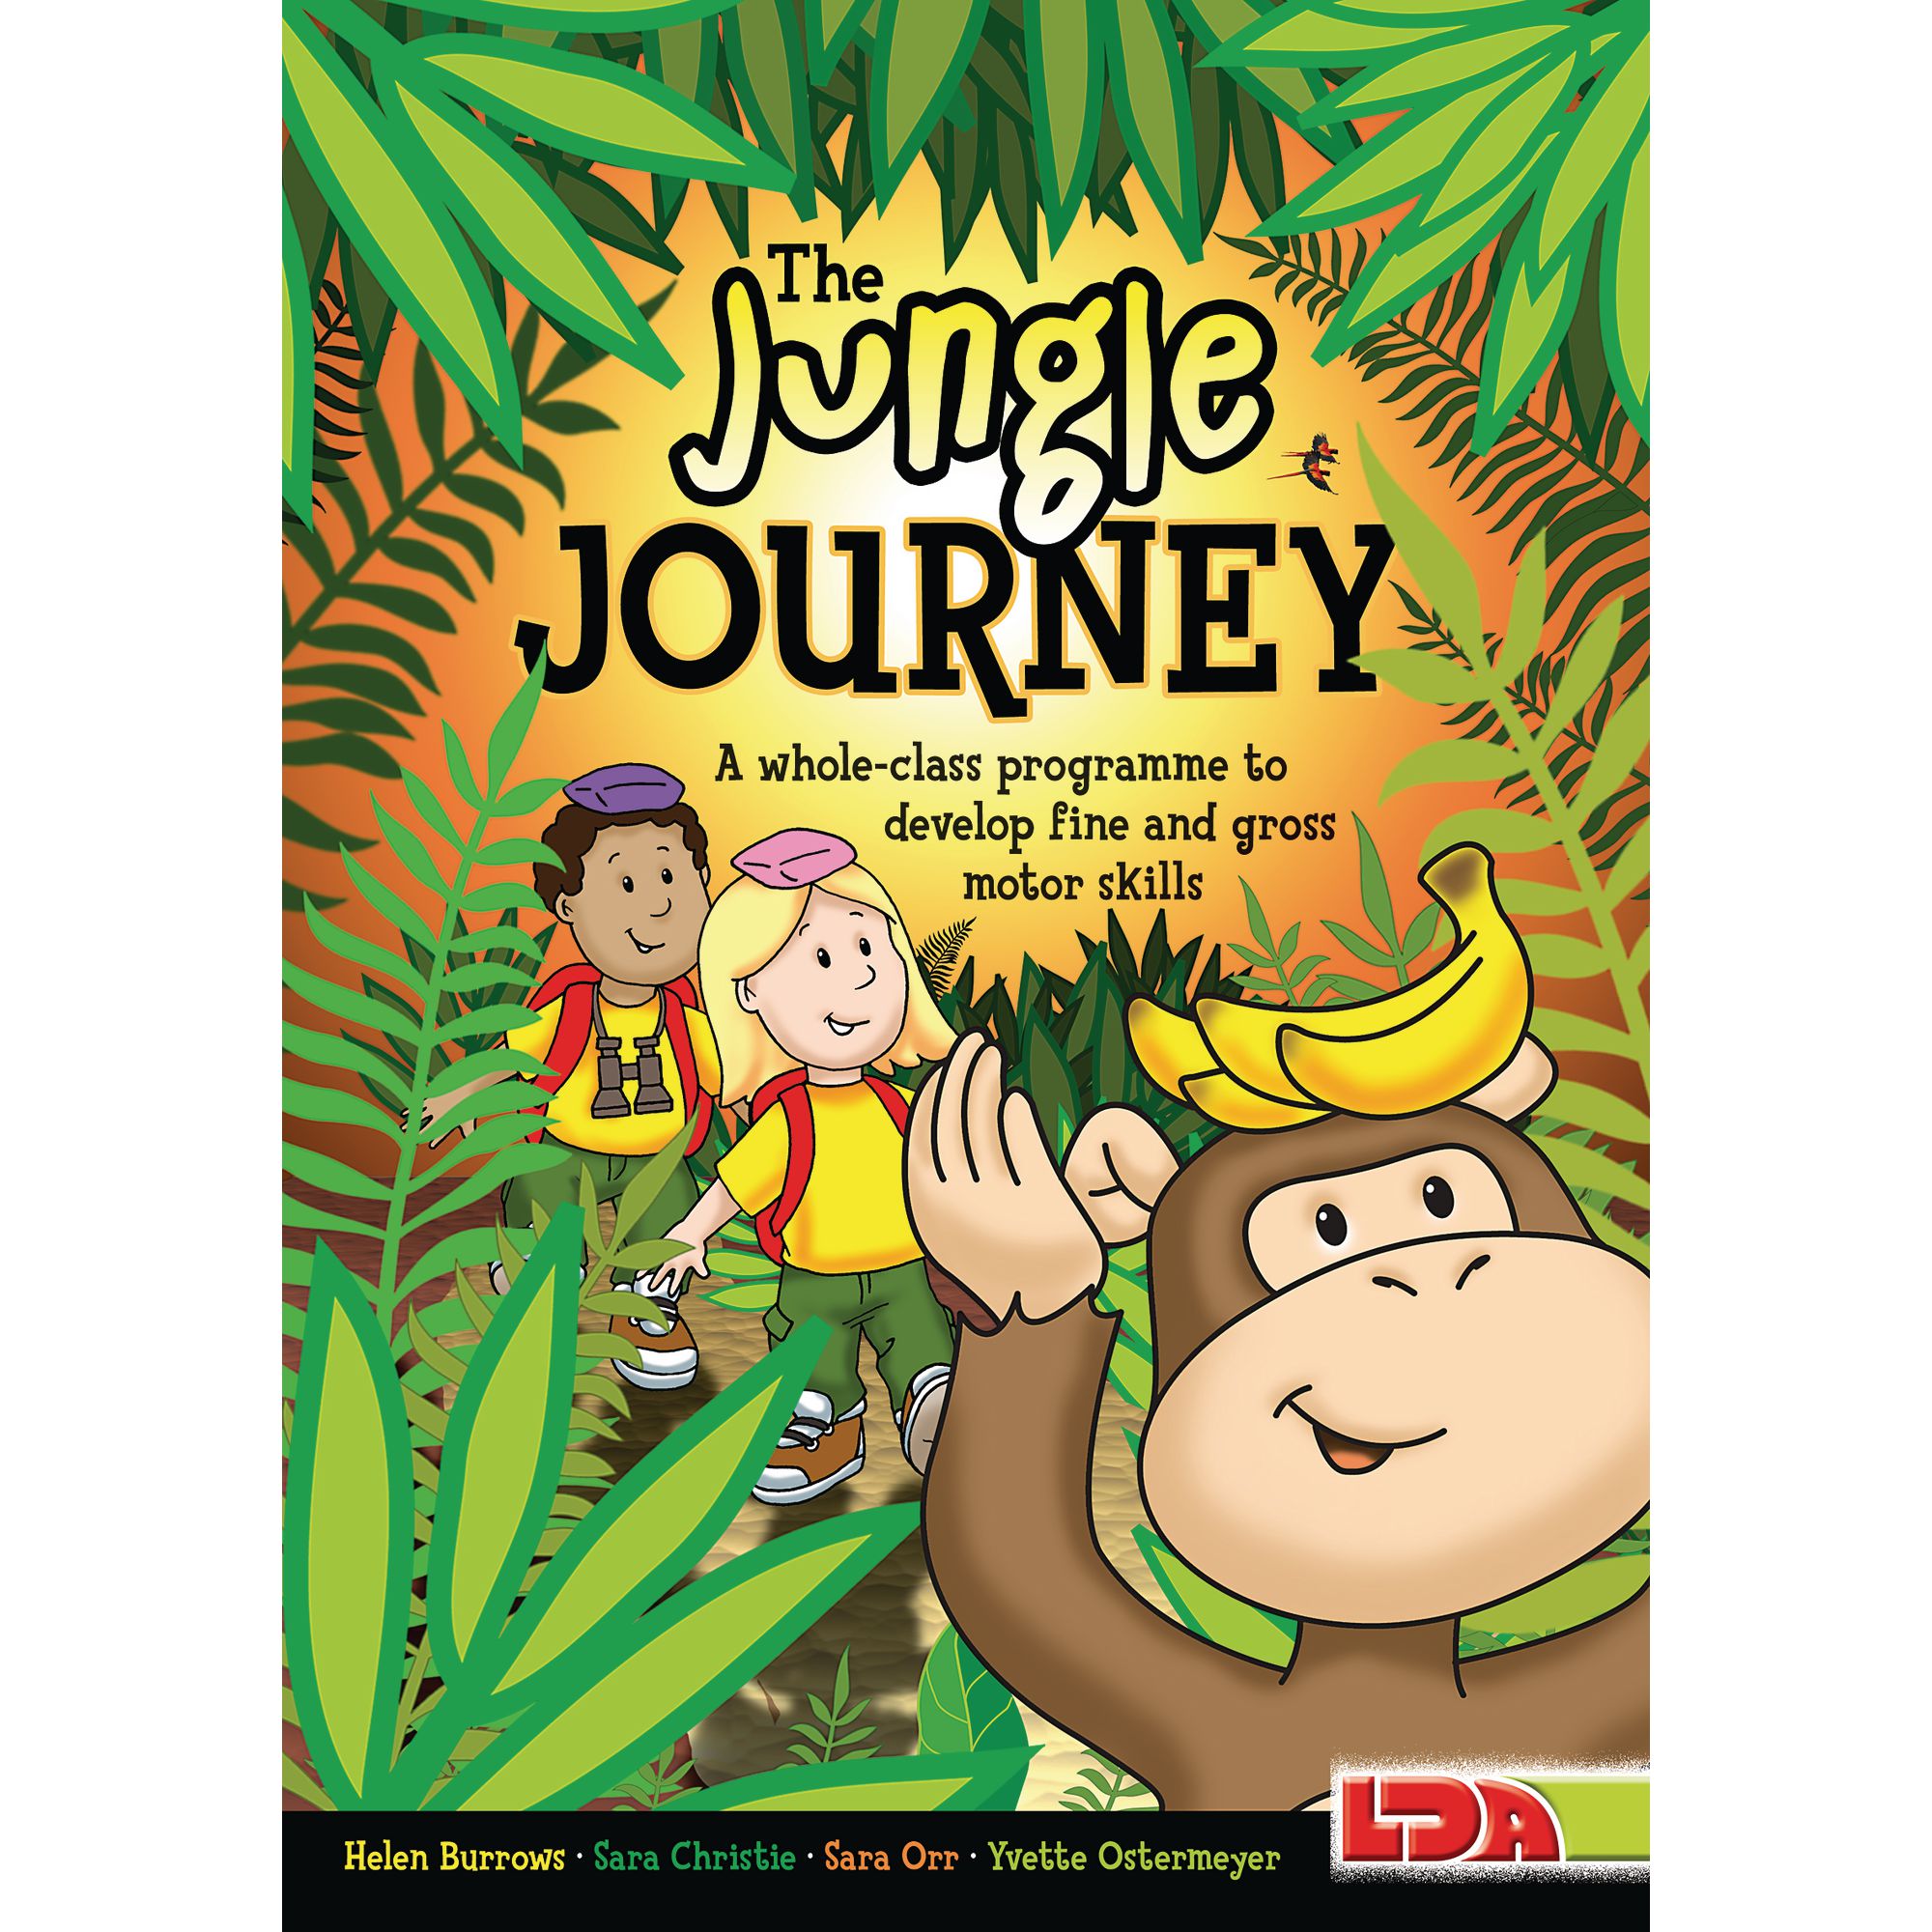 journey into the jungle book